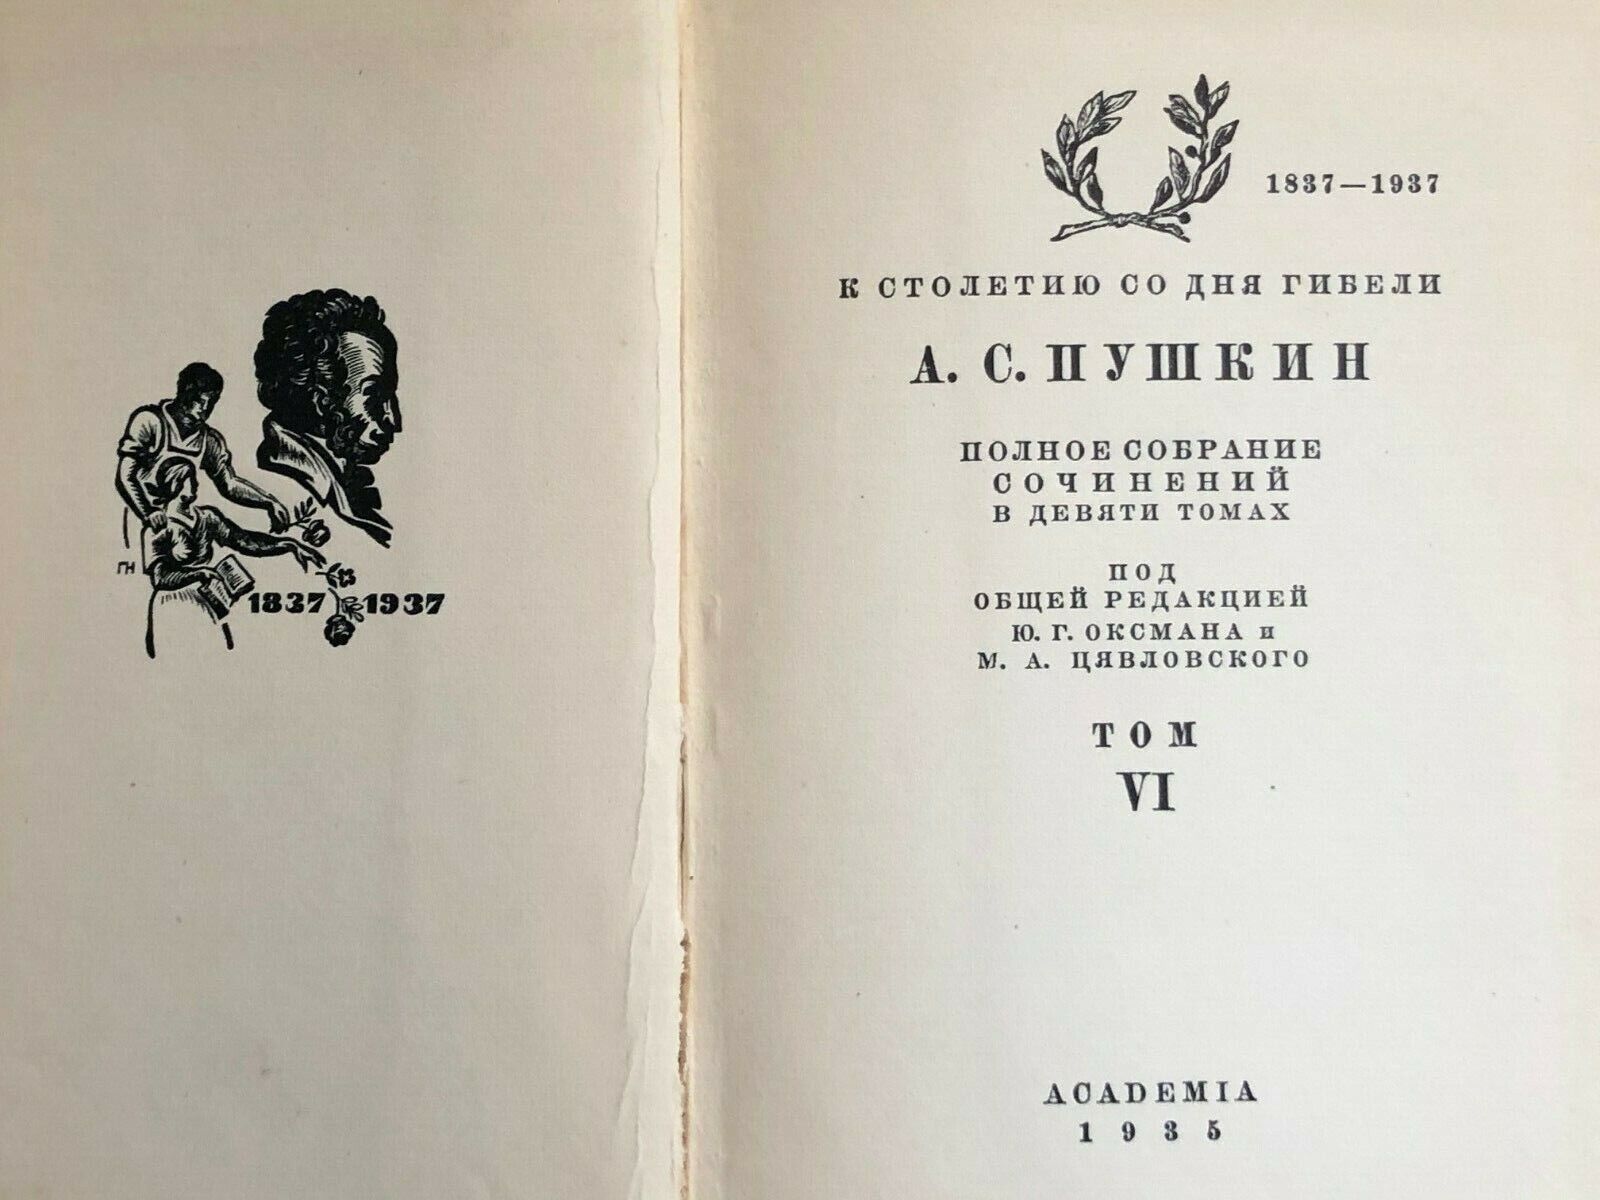 A. PUSHKIN 1935-1937 EDITION COMPLETE WORKS IN 9 MINI VOLUMES WITH COMMENTARIES Без бренда - фотография #8